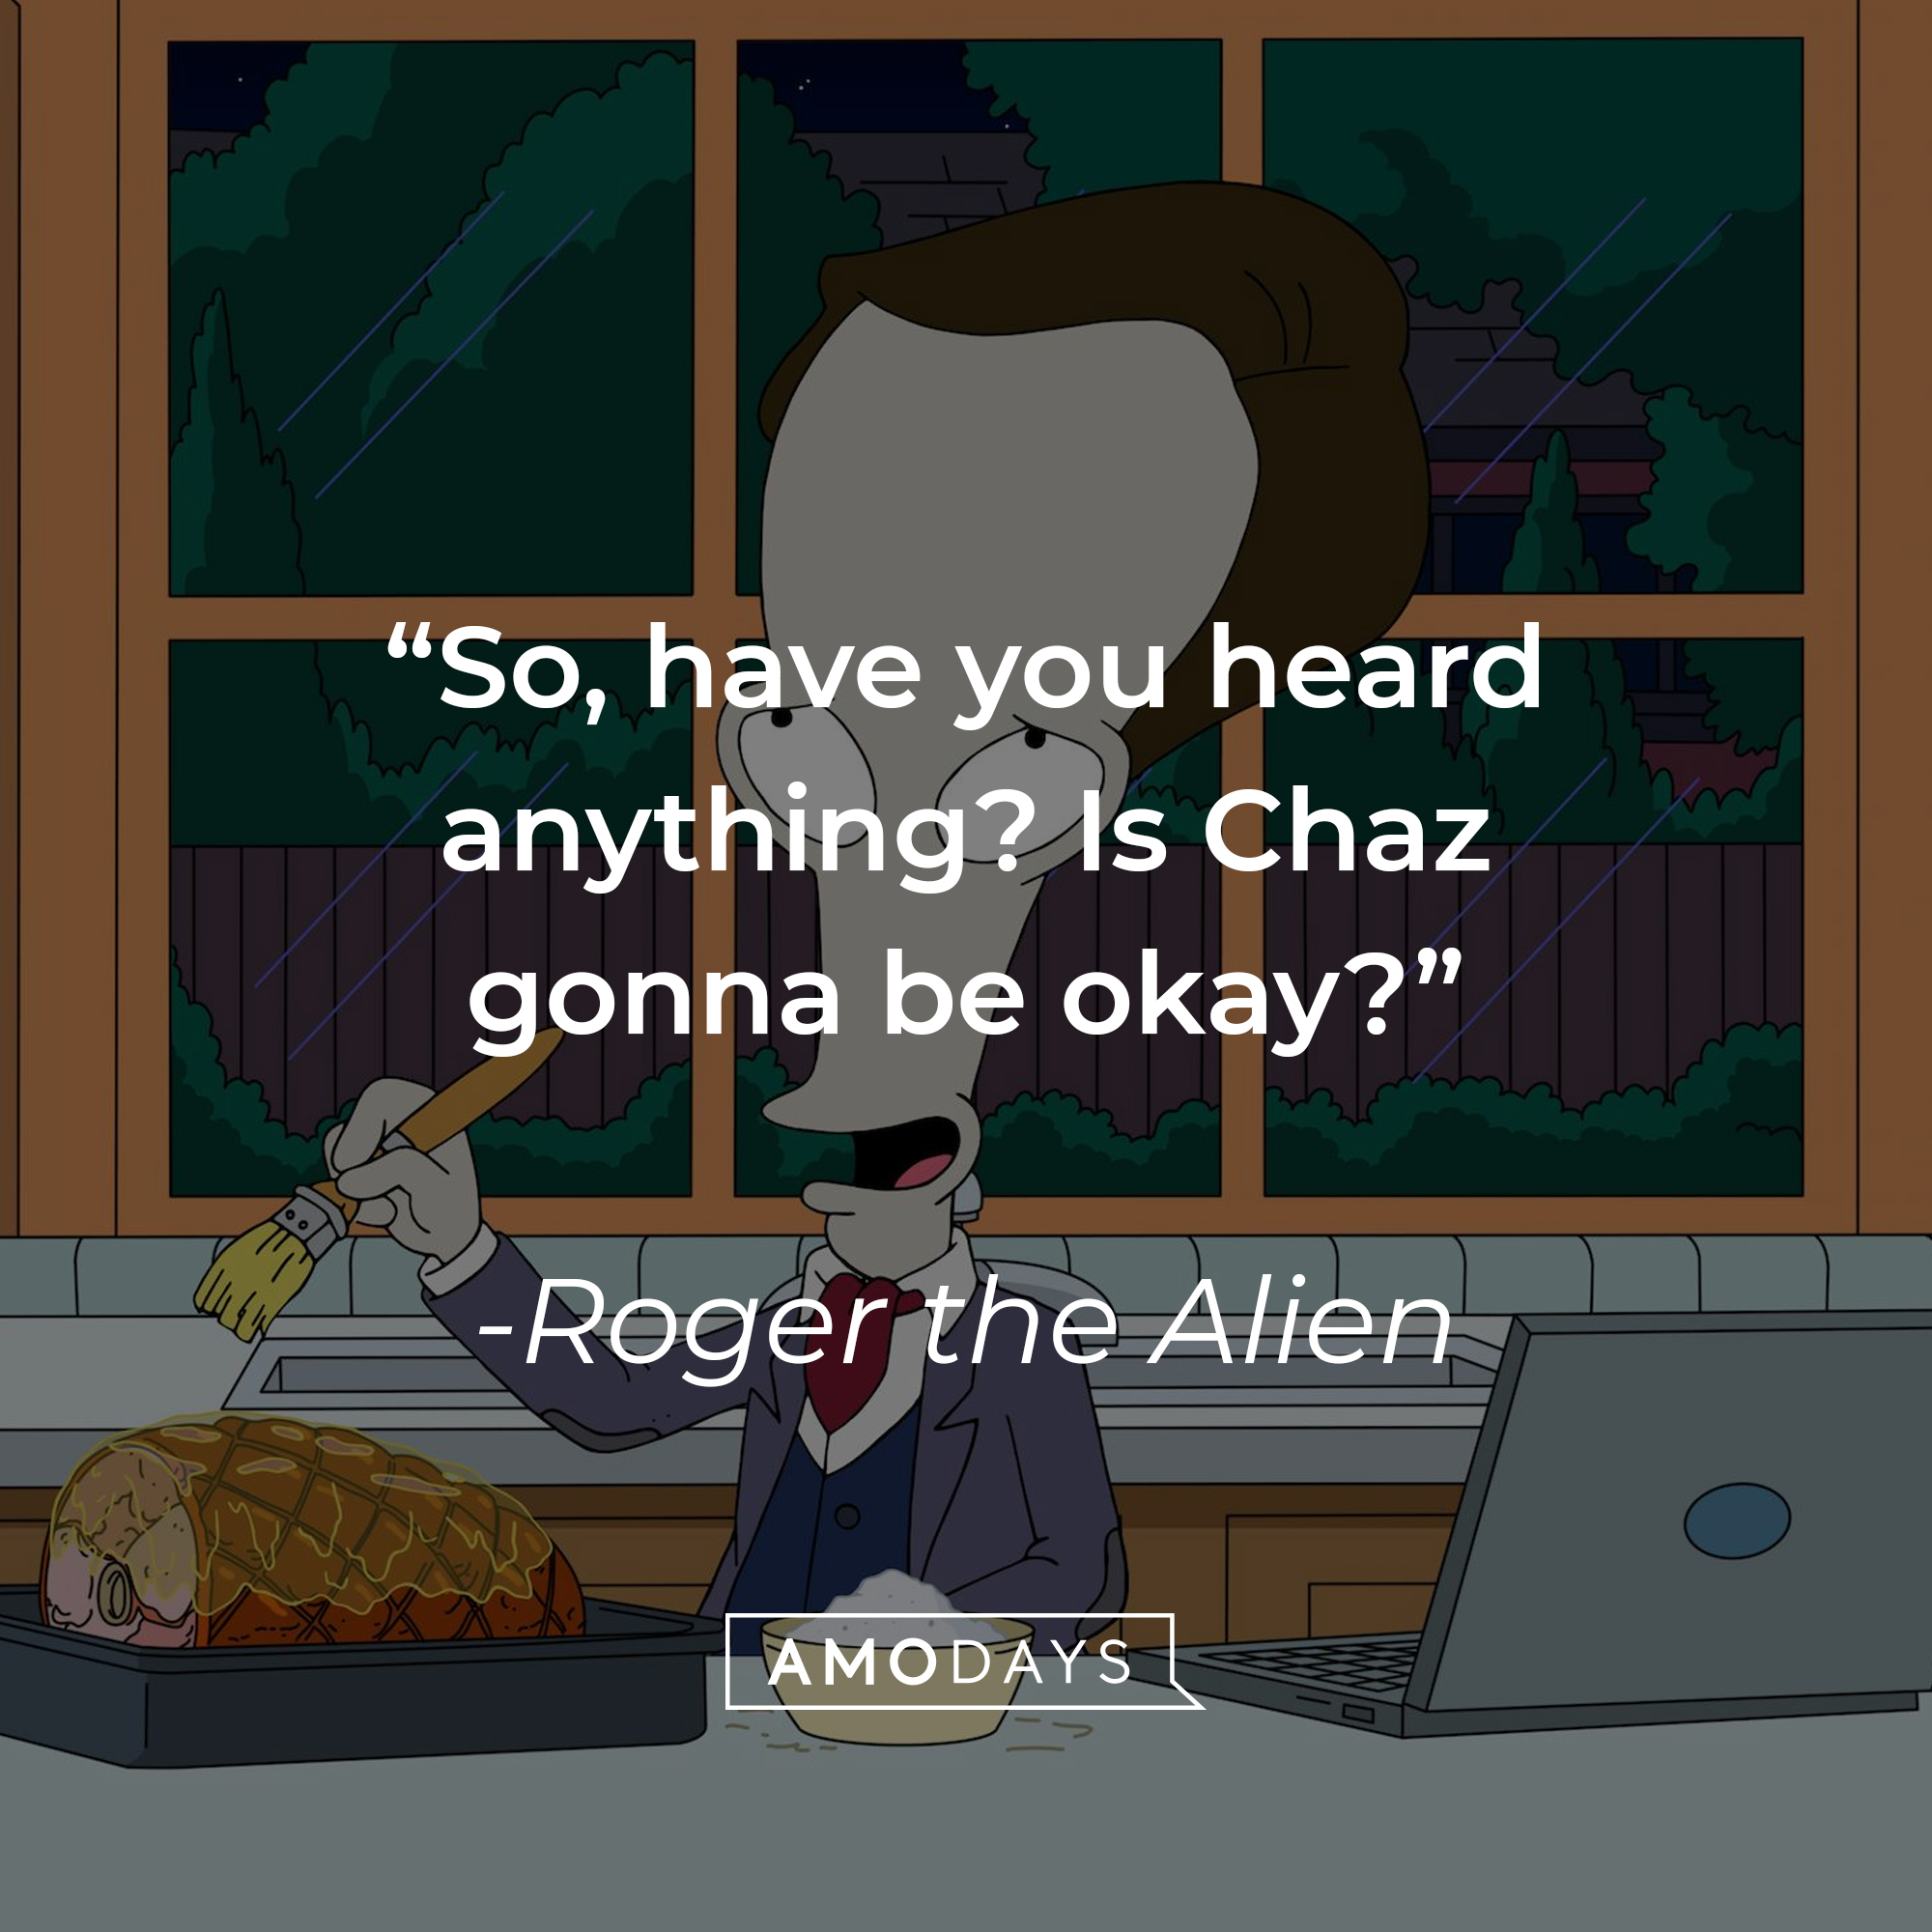 Roger the Alien with his quote: “So, have you heard anything? Is Chaz gonna be okay?” | Source: facebook.com/AmericanDad